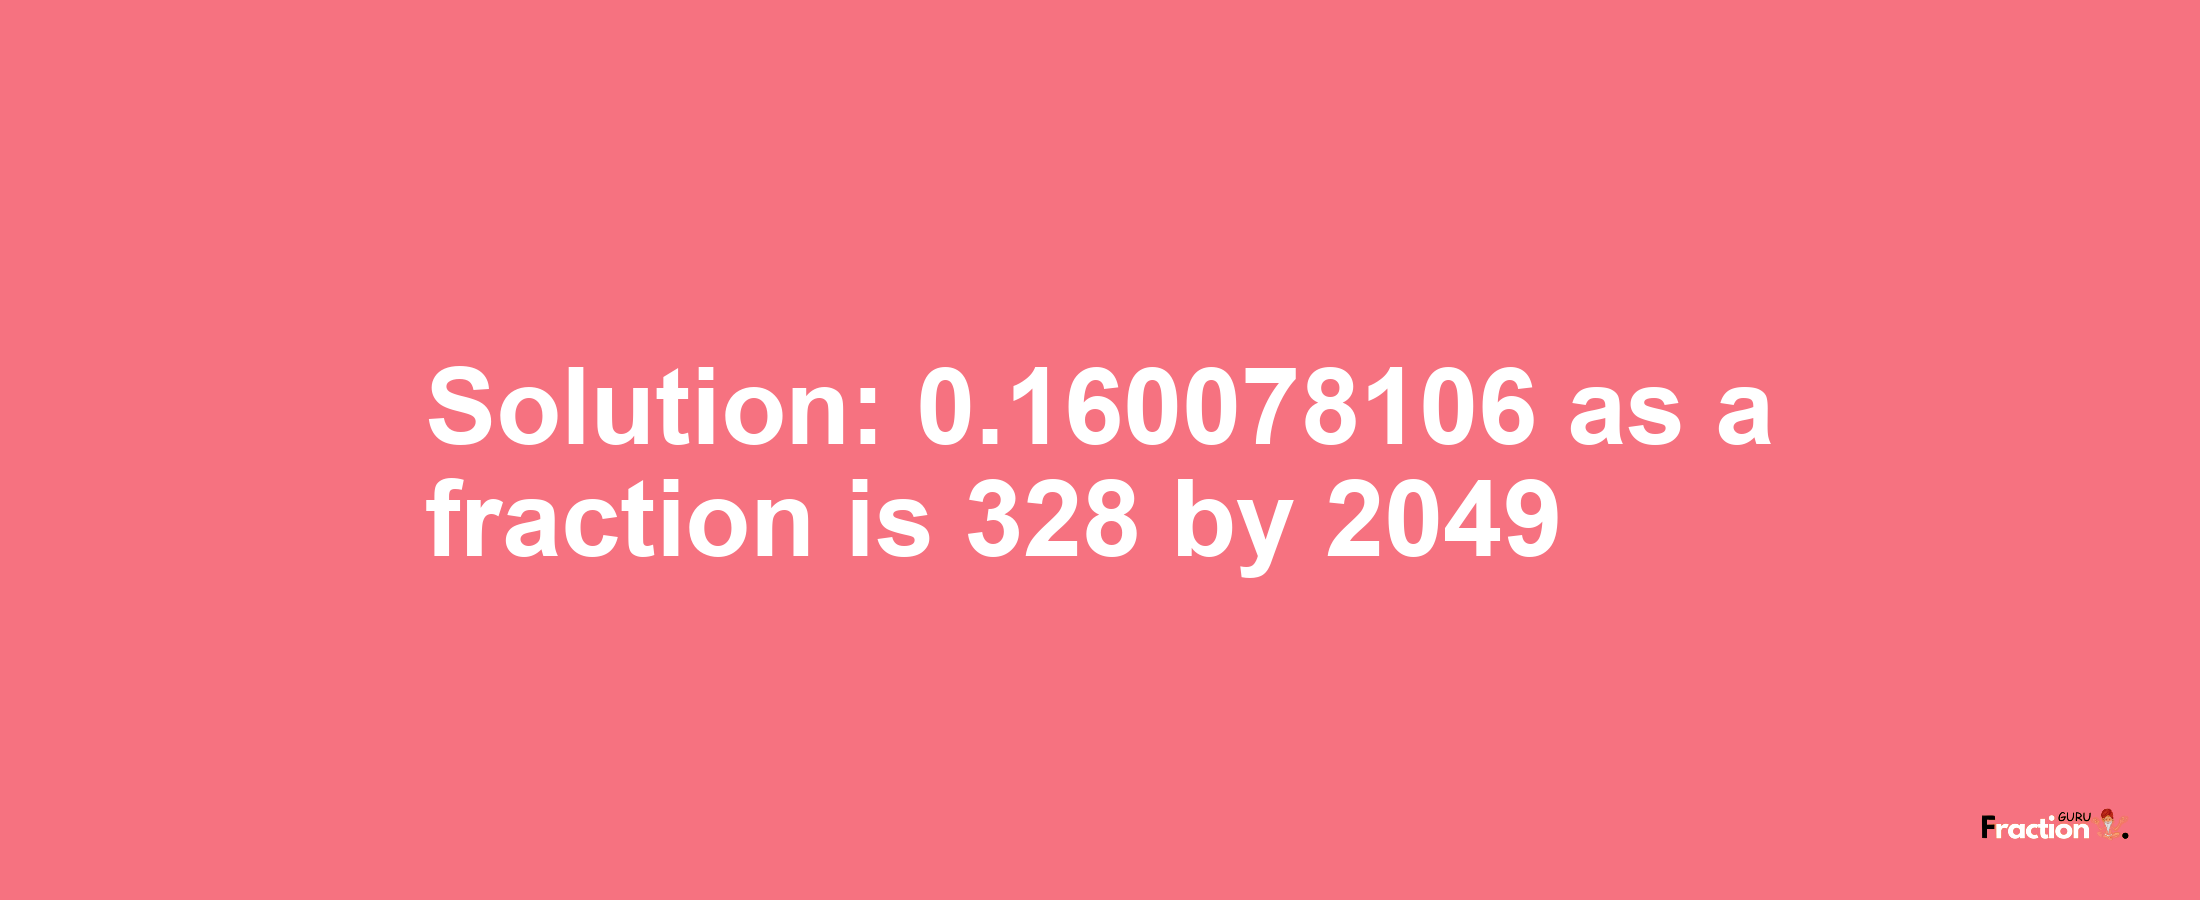 Solution:0.160078106 as a fraction is 328/2049